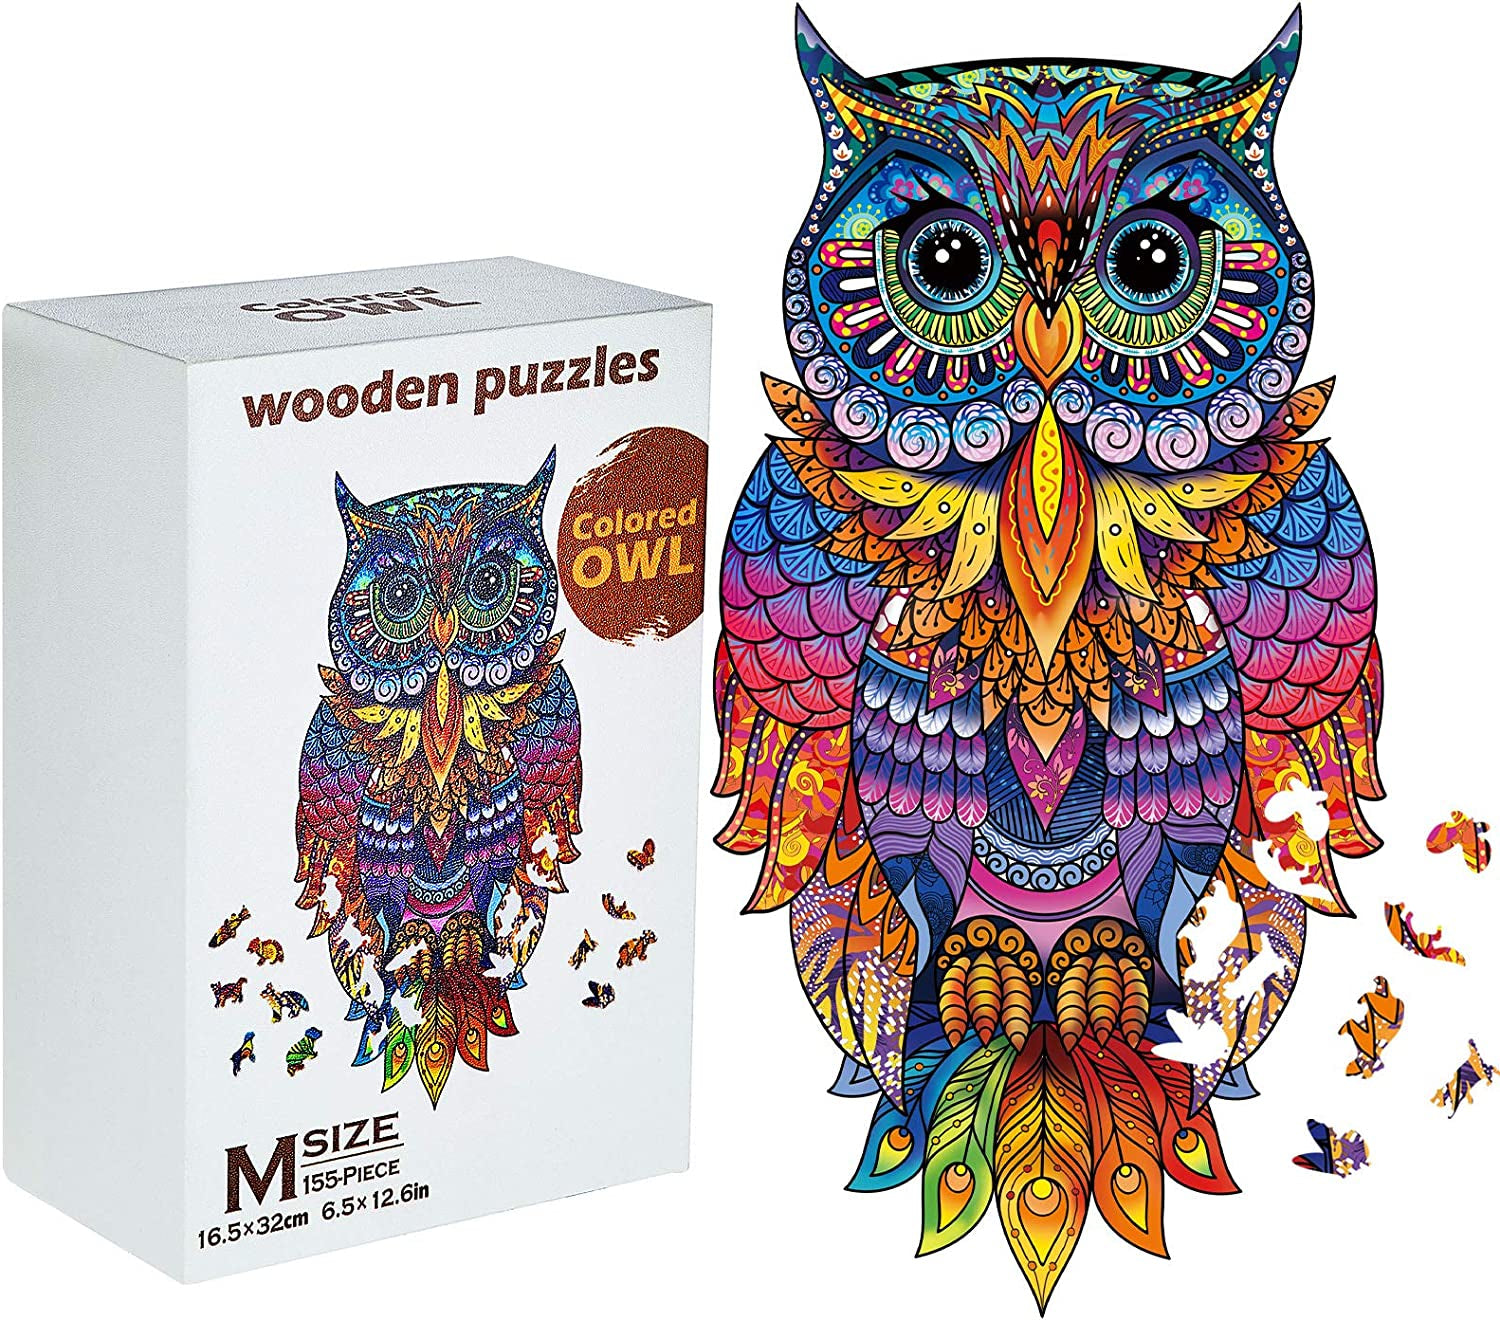 Owl Wooden Jigsaw Puzzles for Adult Wooden Jigsaw Puzzles Owl Animal Shape 155 Pcs 6.5